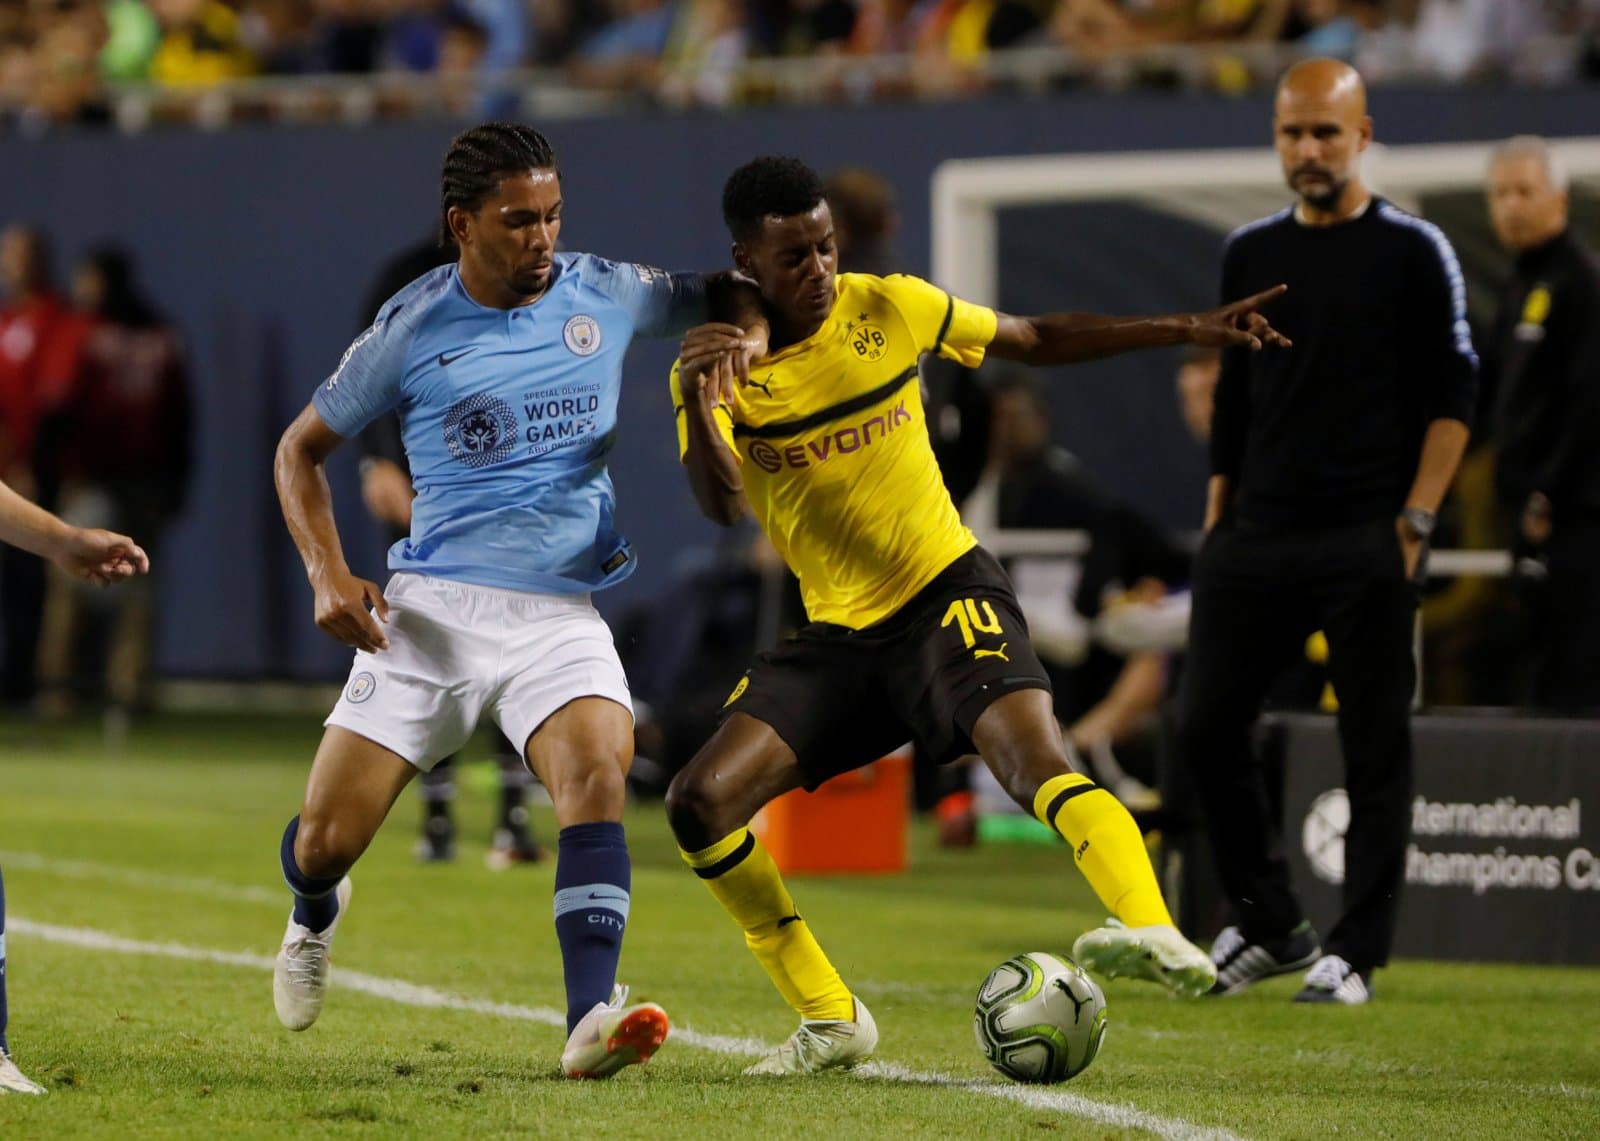 Manchester City vs Borussia Dortmund Preview, Tips and Odds